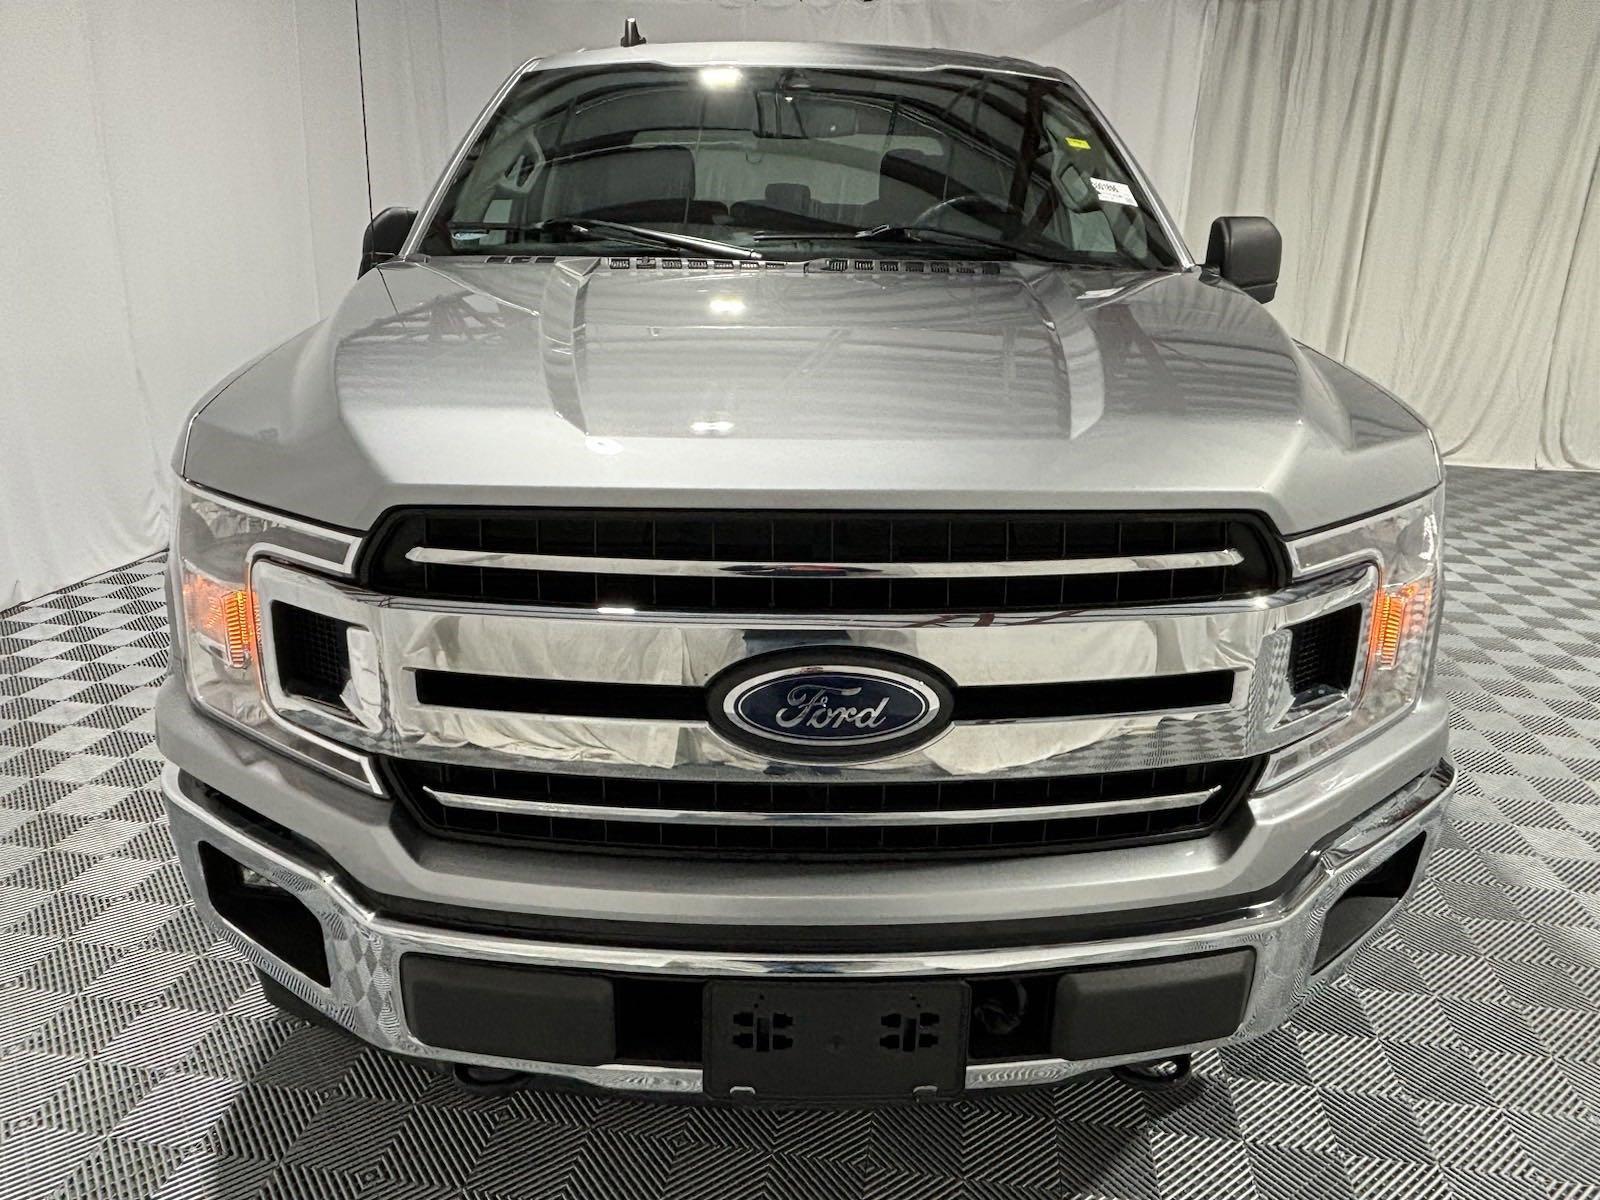 Used 2020 Ford F-150 XLT SuperCrew Cab Styleside for sale in St Joseph MO